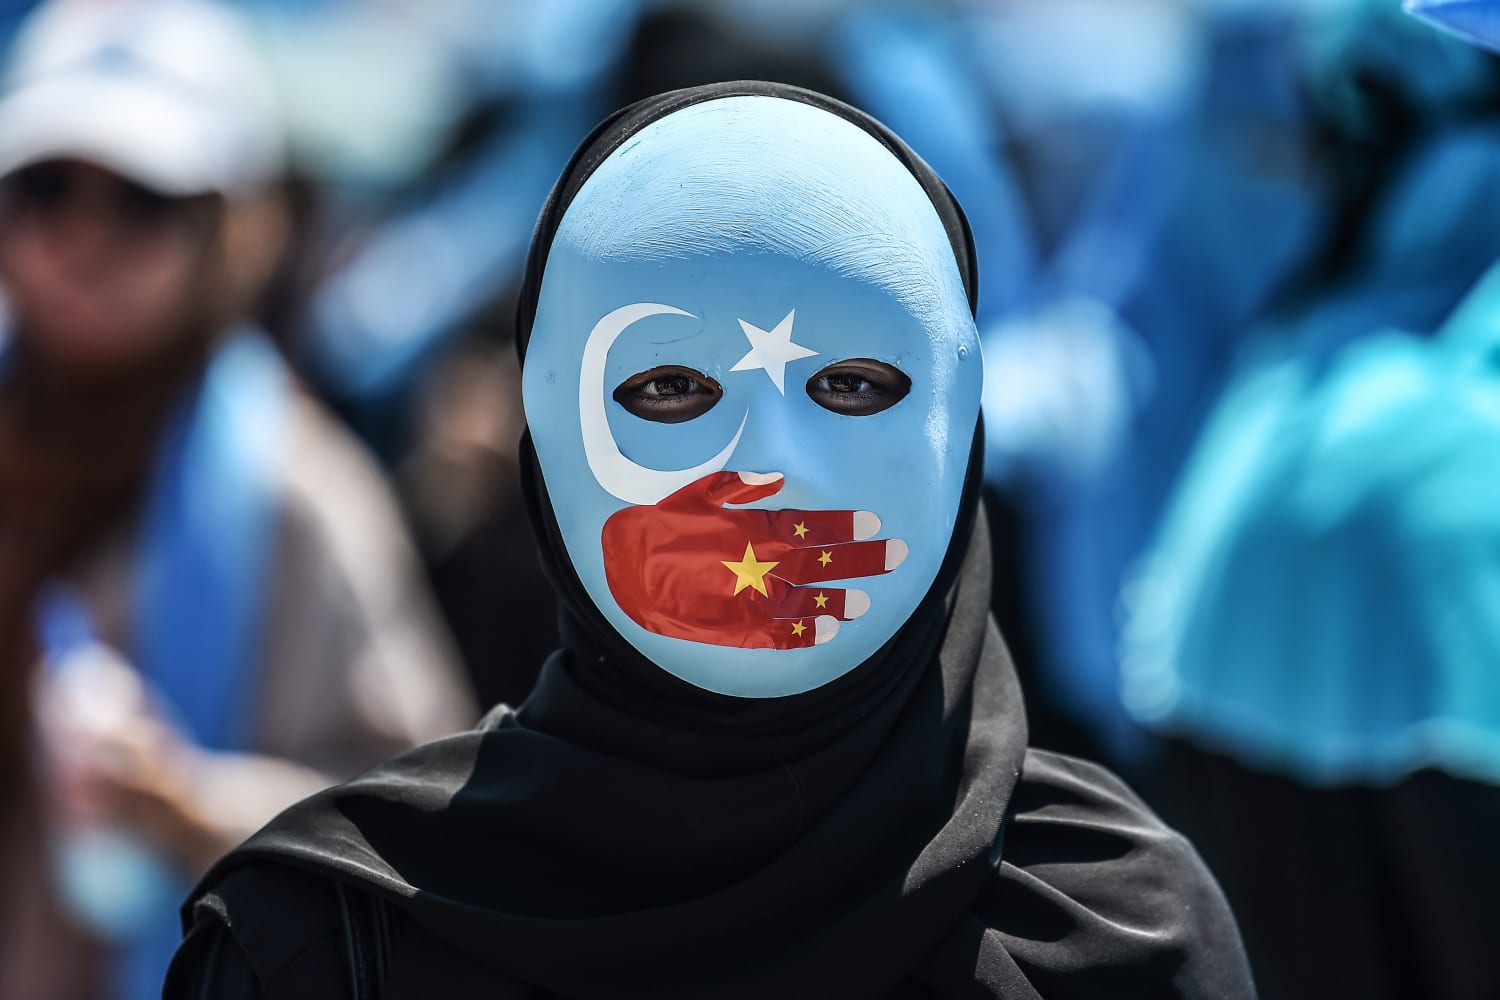 The Chinese government is hunting down Uyghurs around the world with help from some surprising countries